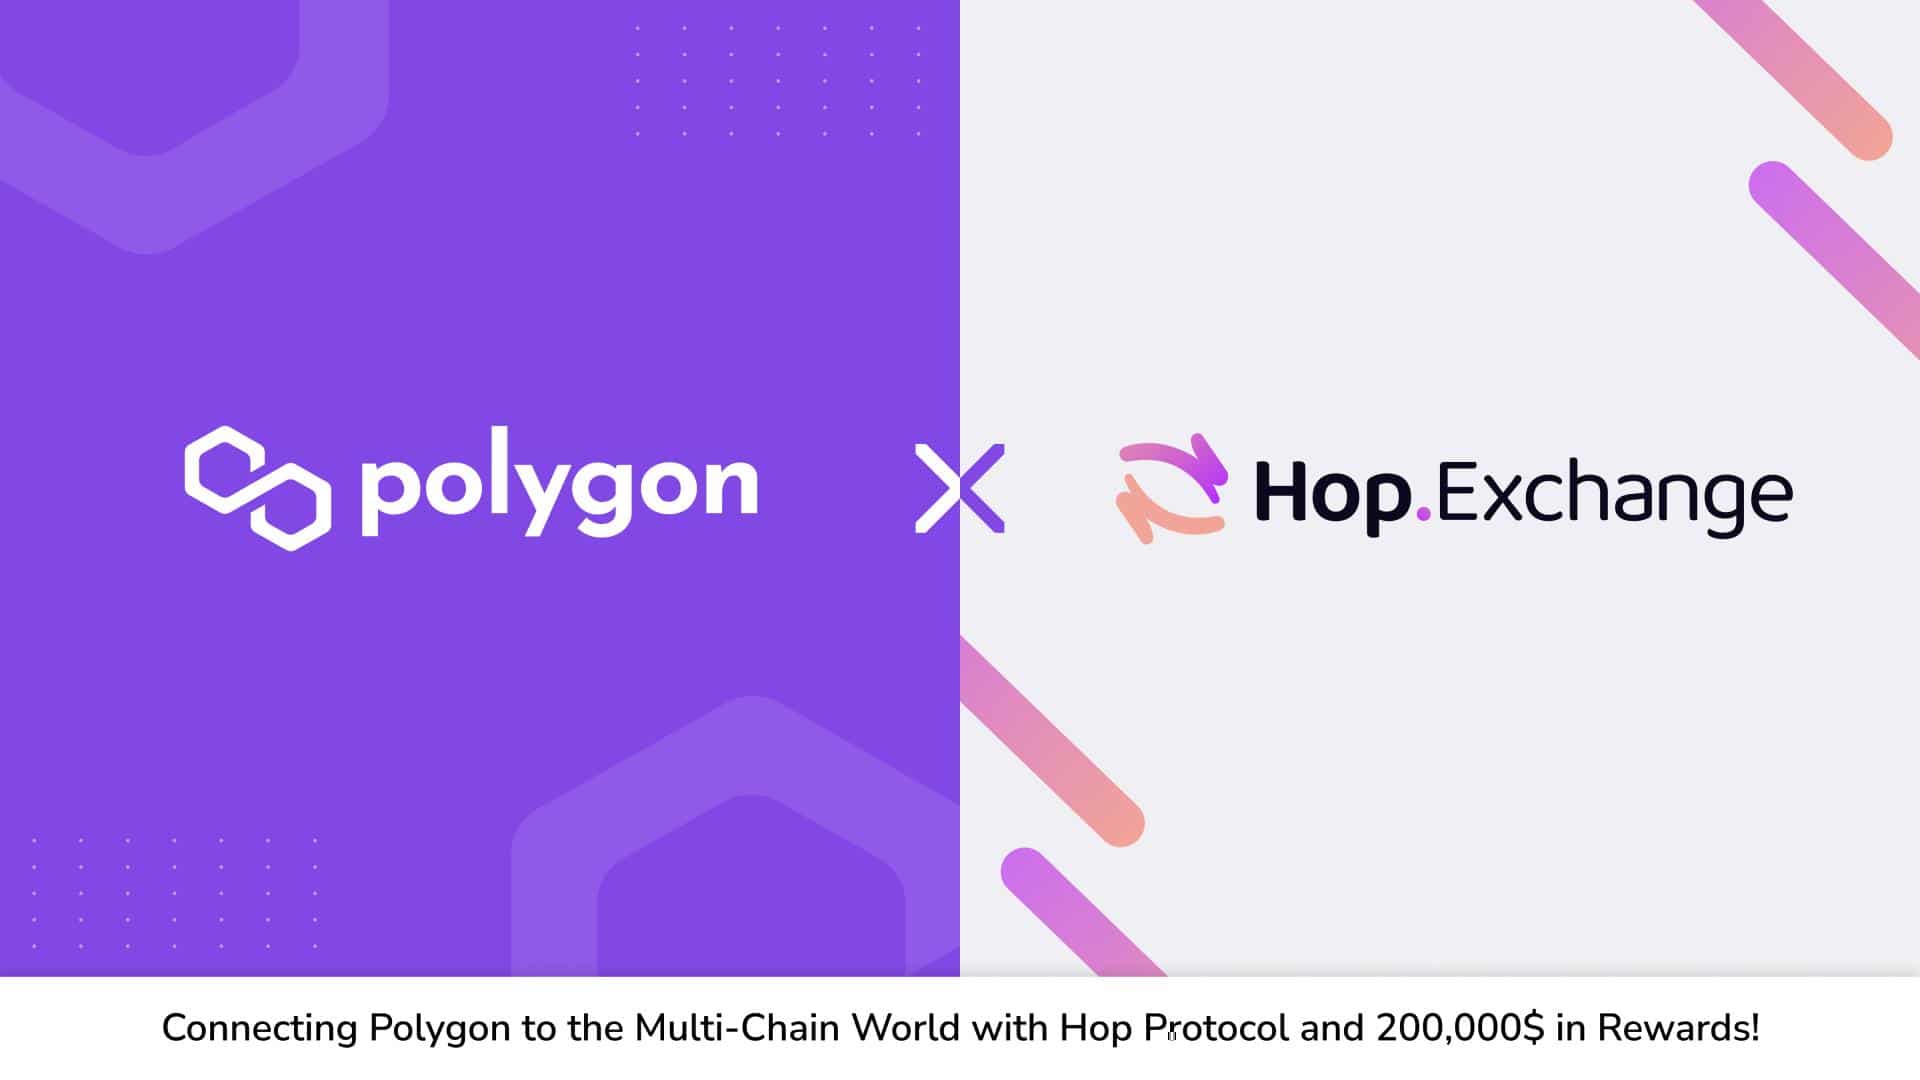 Connecting Polygon to the Multi-Chain world via Hop Protocol with 200,000$ in Liquidity Rewards